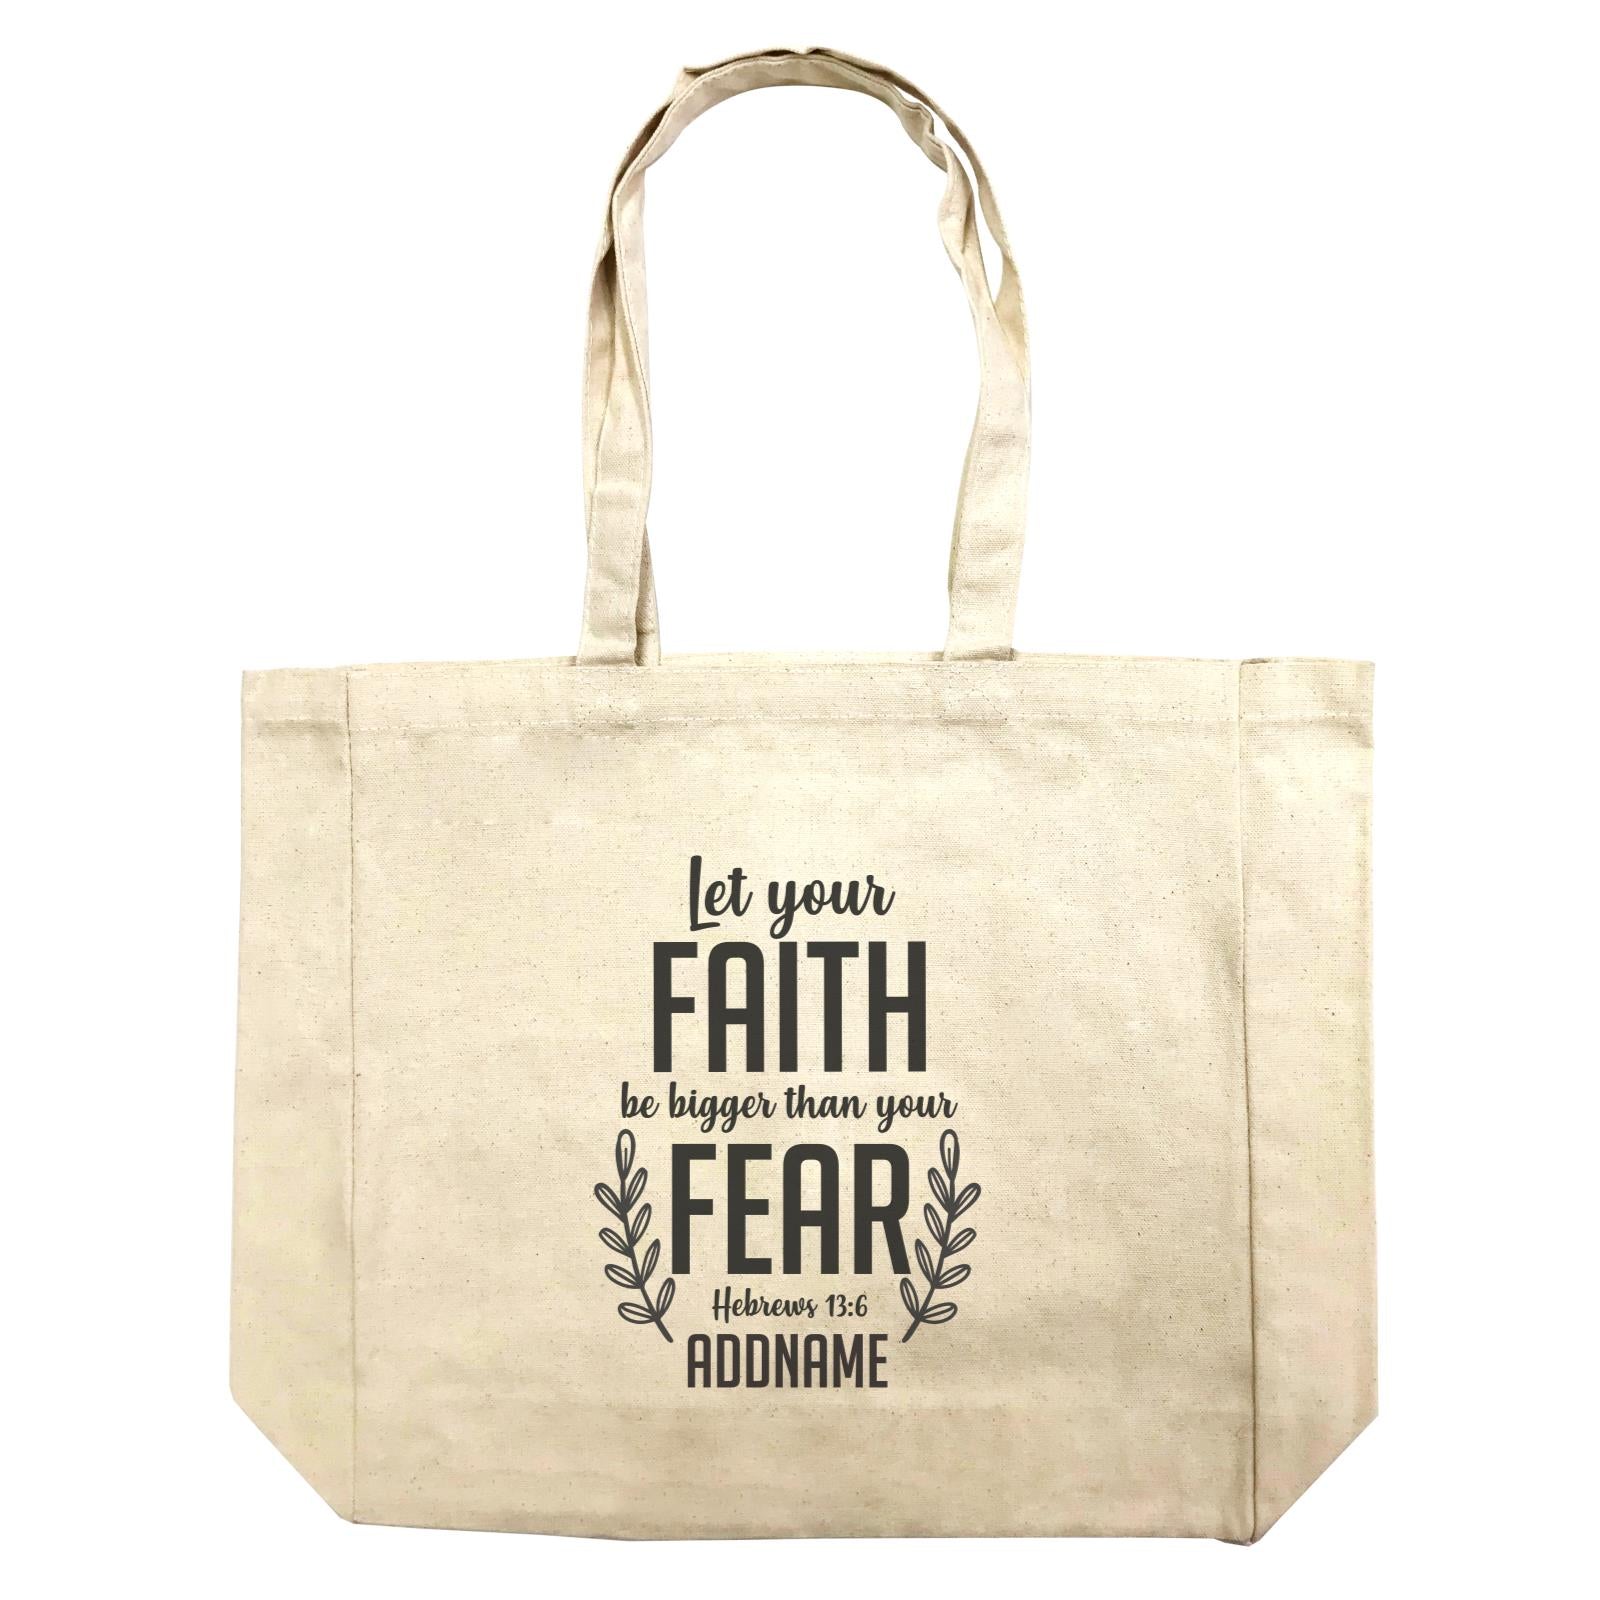 Christ Newborn Let Your Faith Be Bigger Than Your Fear Hebrews 13.6 Addname Shopping Bag